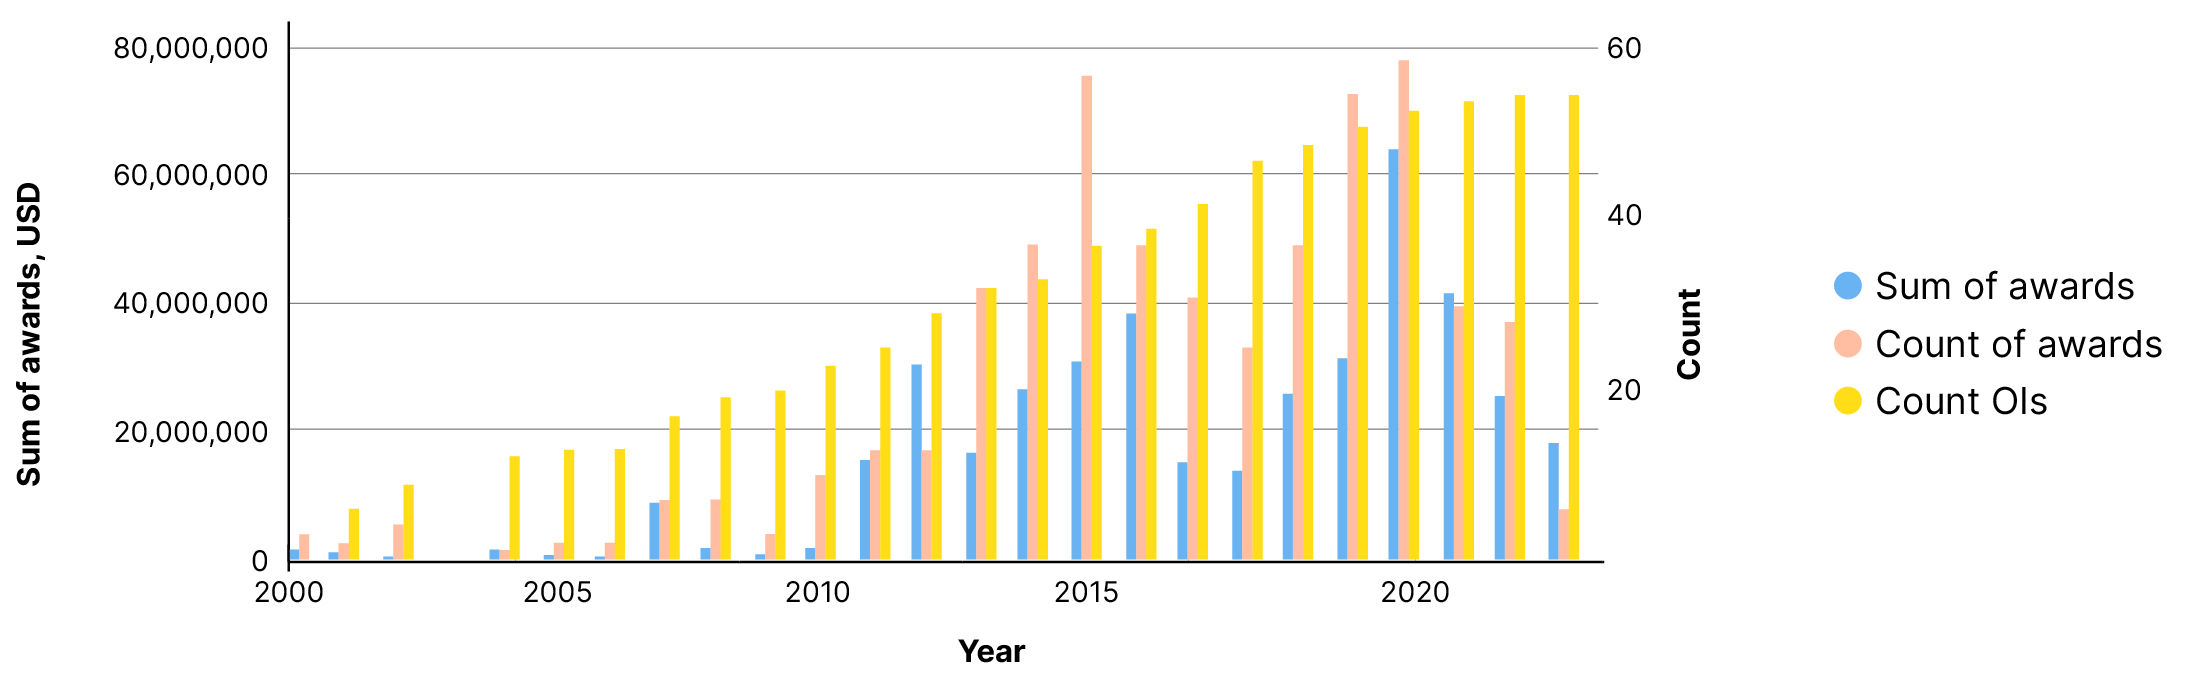 Bar chart of the sum and count of awards, and the number of open infrastructures available of funding by year between 2000 and 2024. The number of awards made is the highest in 2021, while the number of open infrastructures available for funding grows steadily between 2000 and 2024.